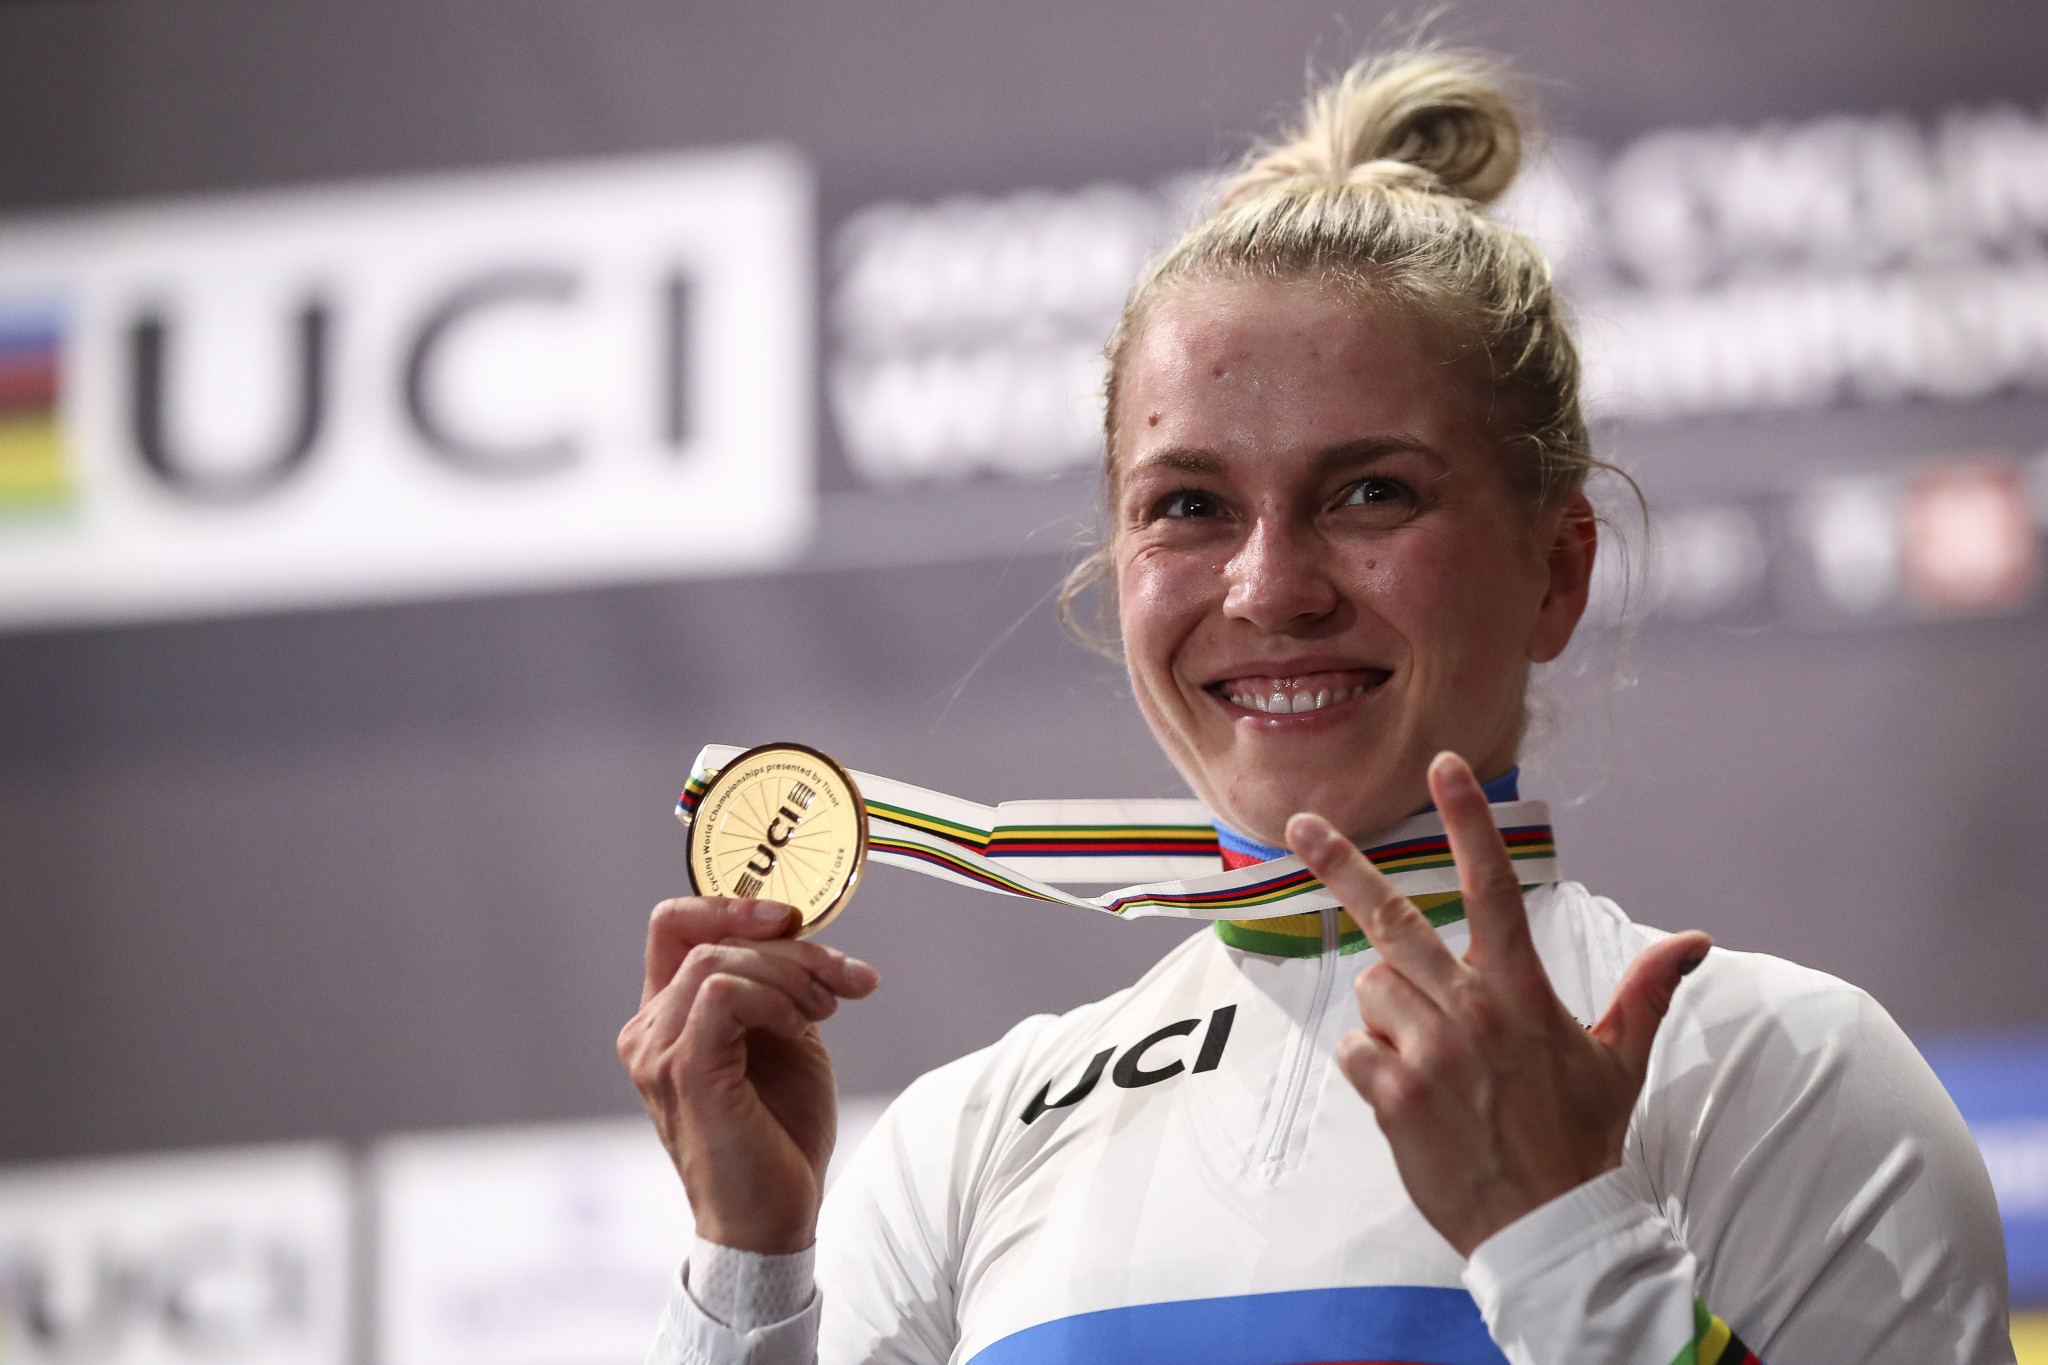 Emma Hinze of Germany won her third gold medal of the World Track Cycling Championships ©Getty Images